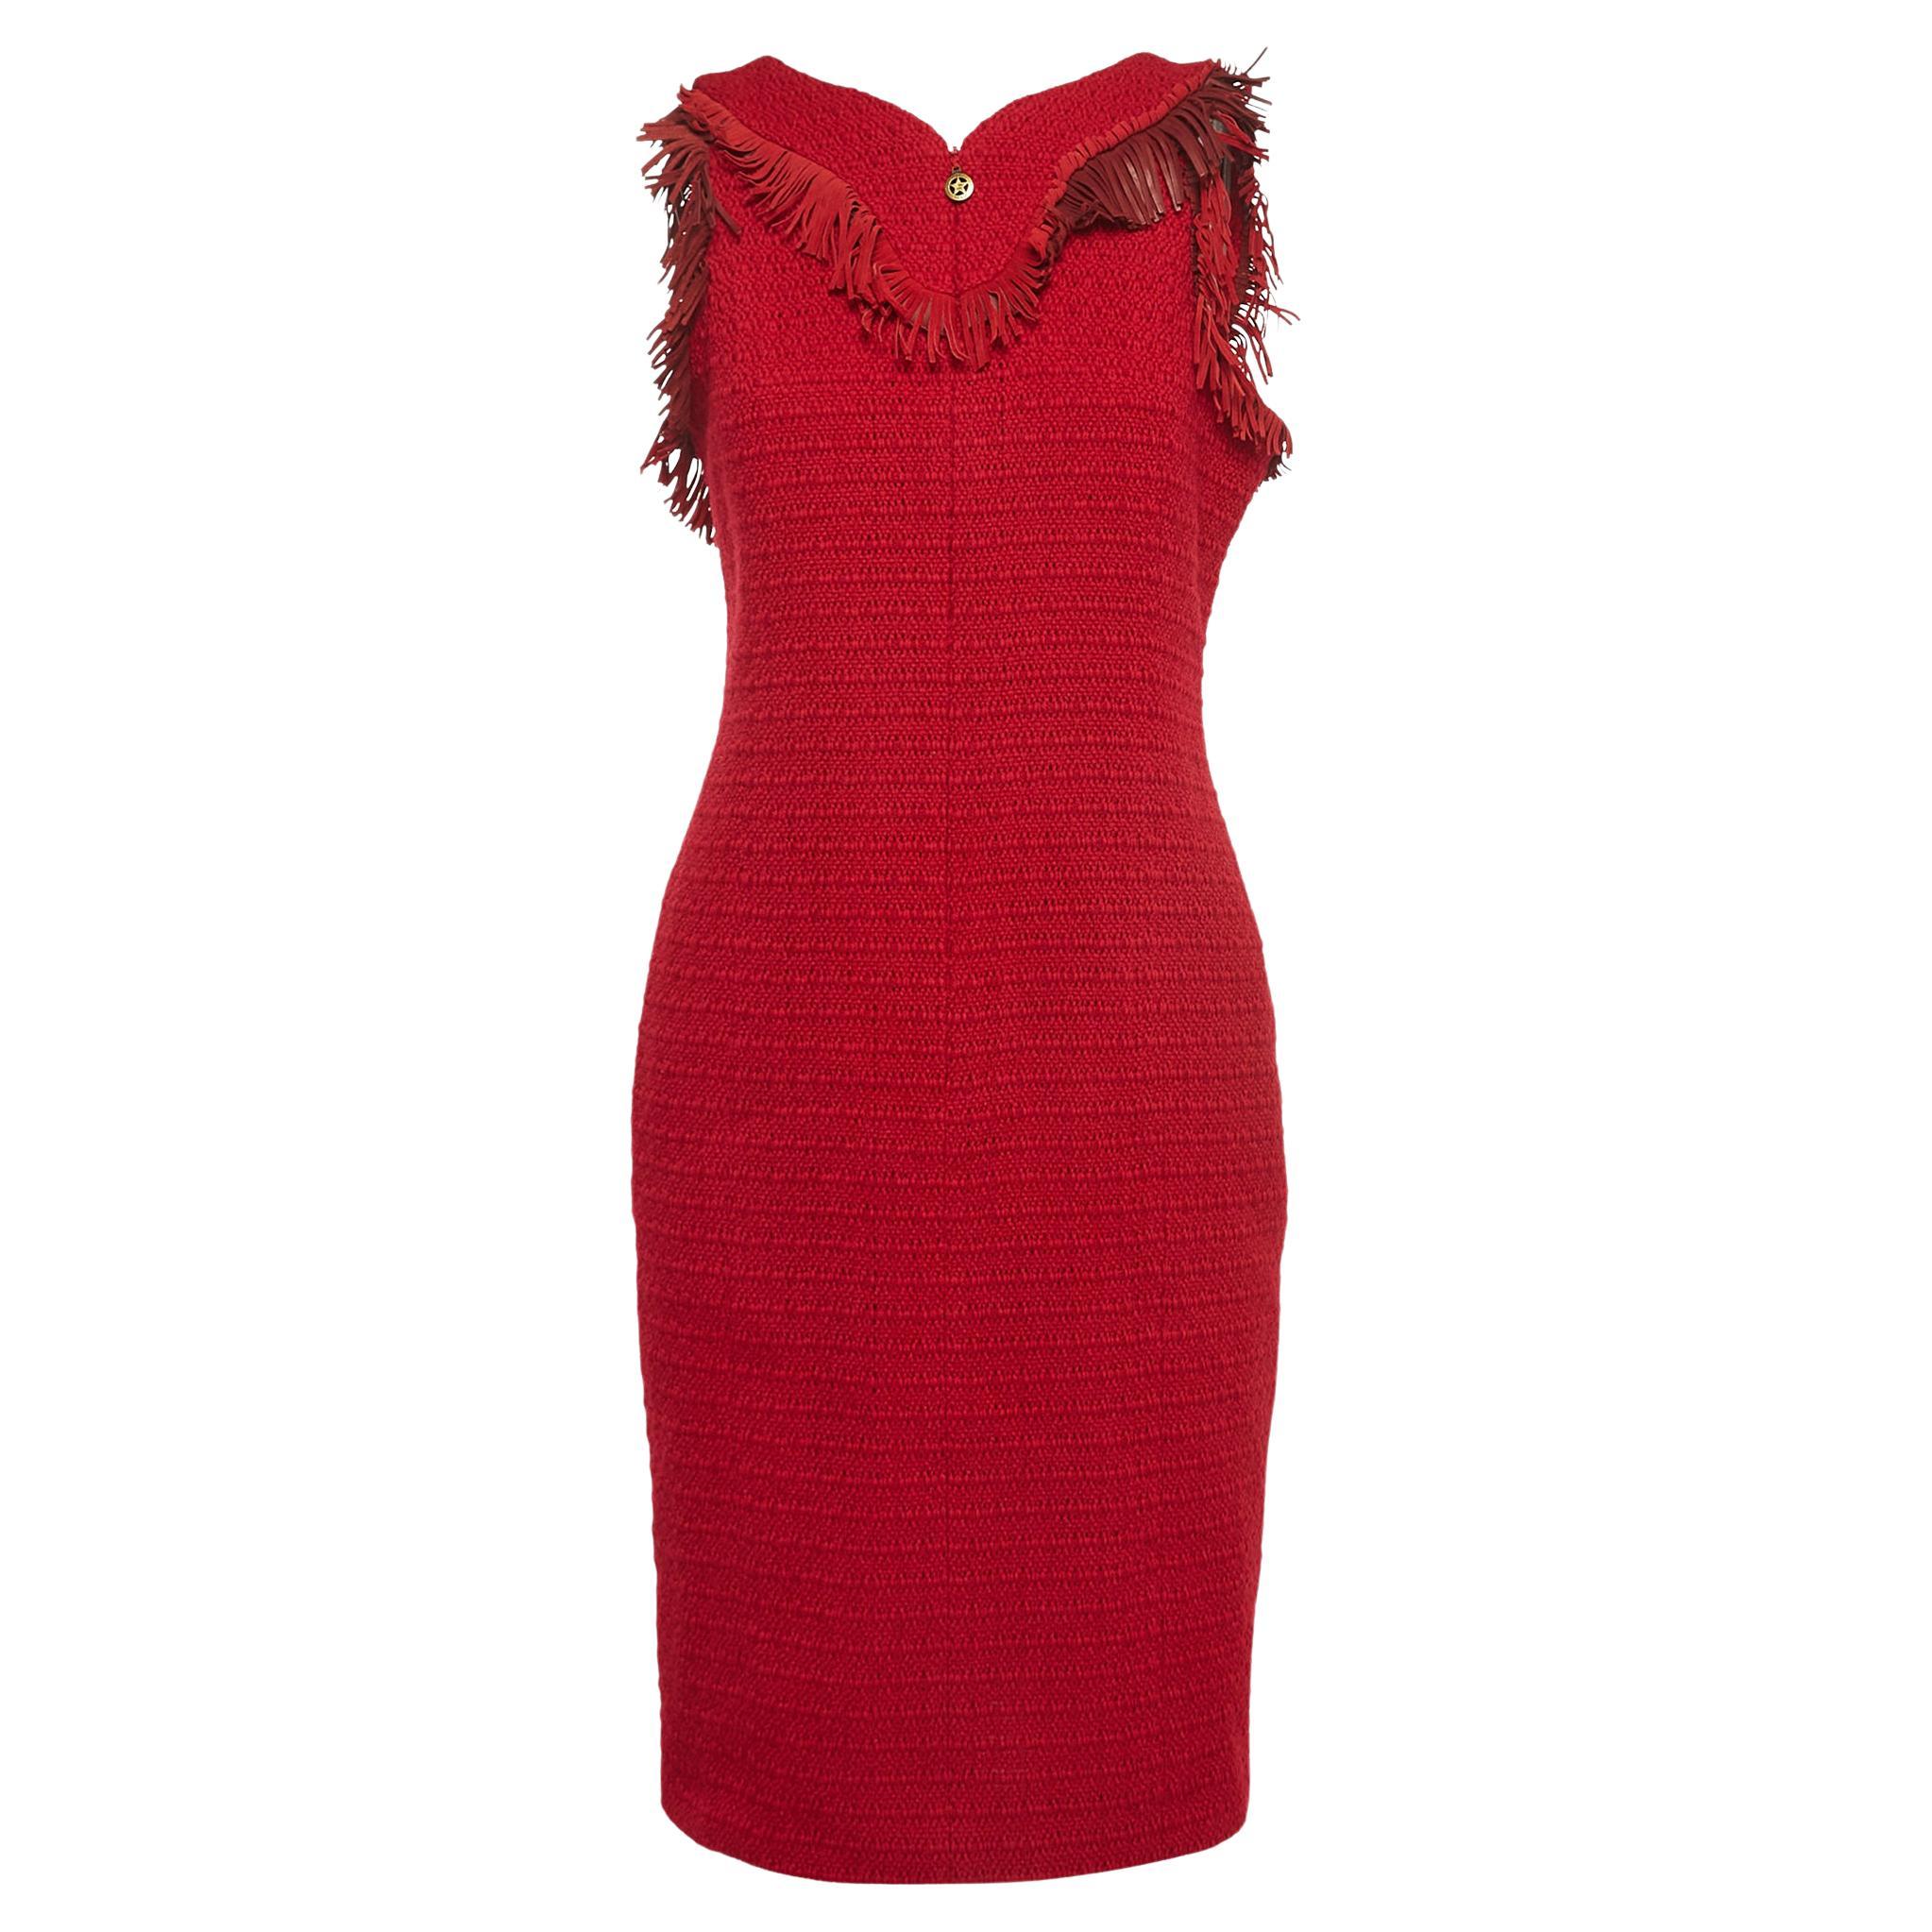 Chanel Red Suede Fringed Tweed Sleeveless Short Dress L